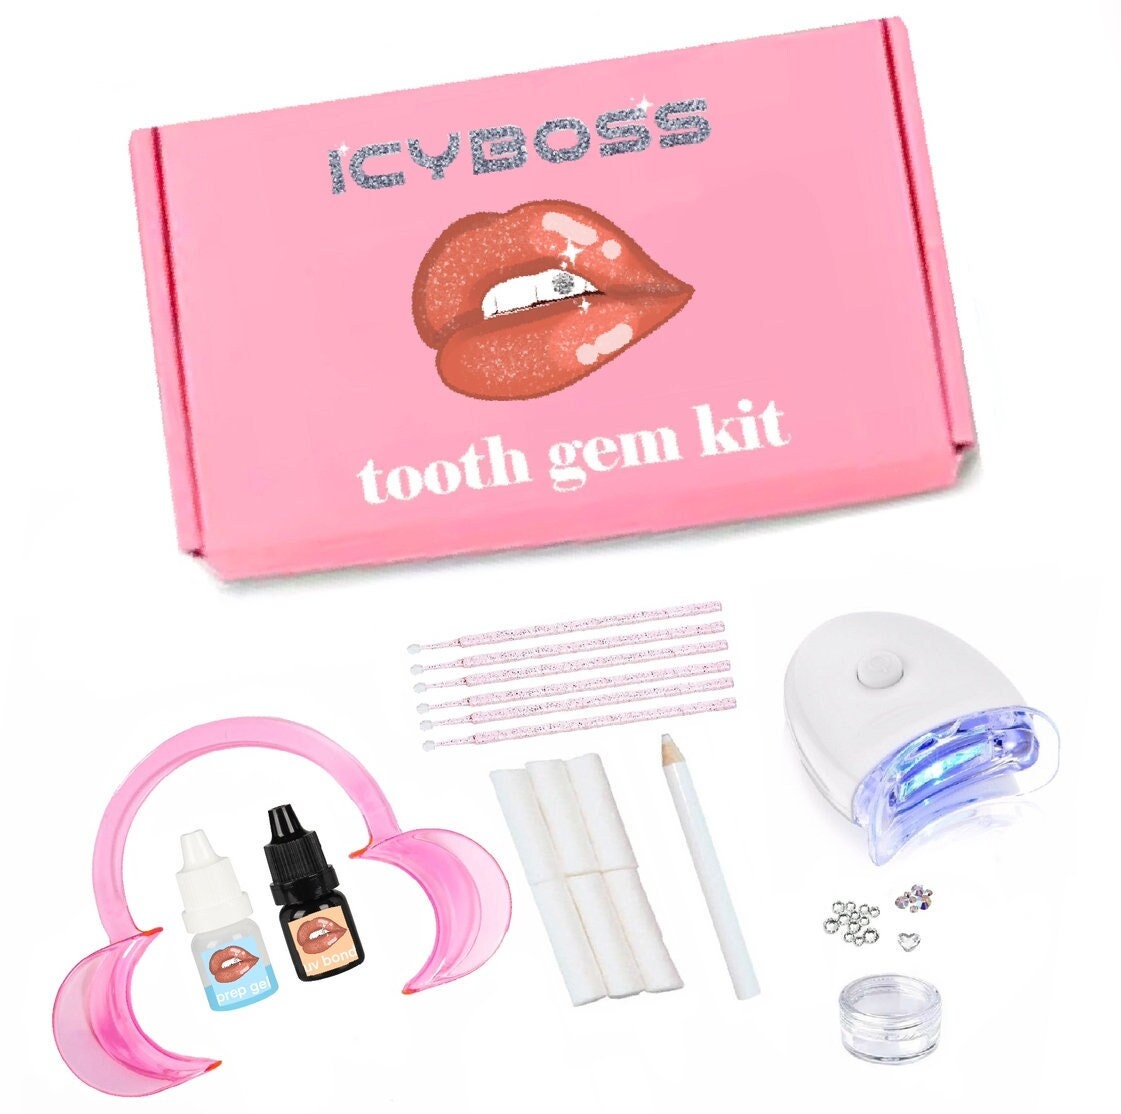 Buy Tooth Gem Kit Online In India -  India